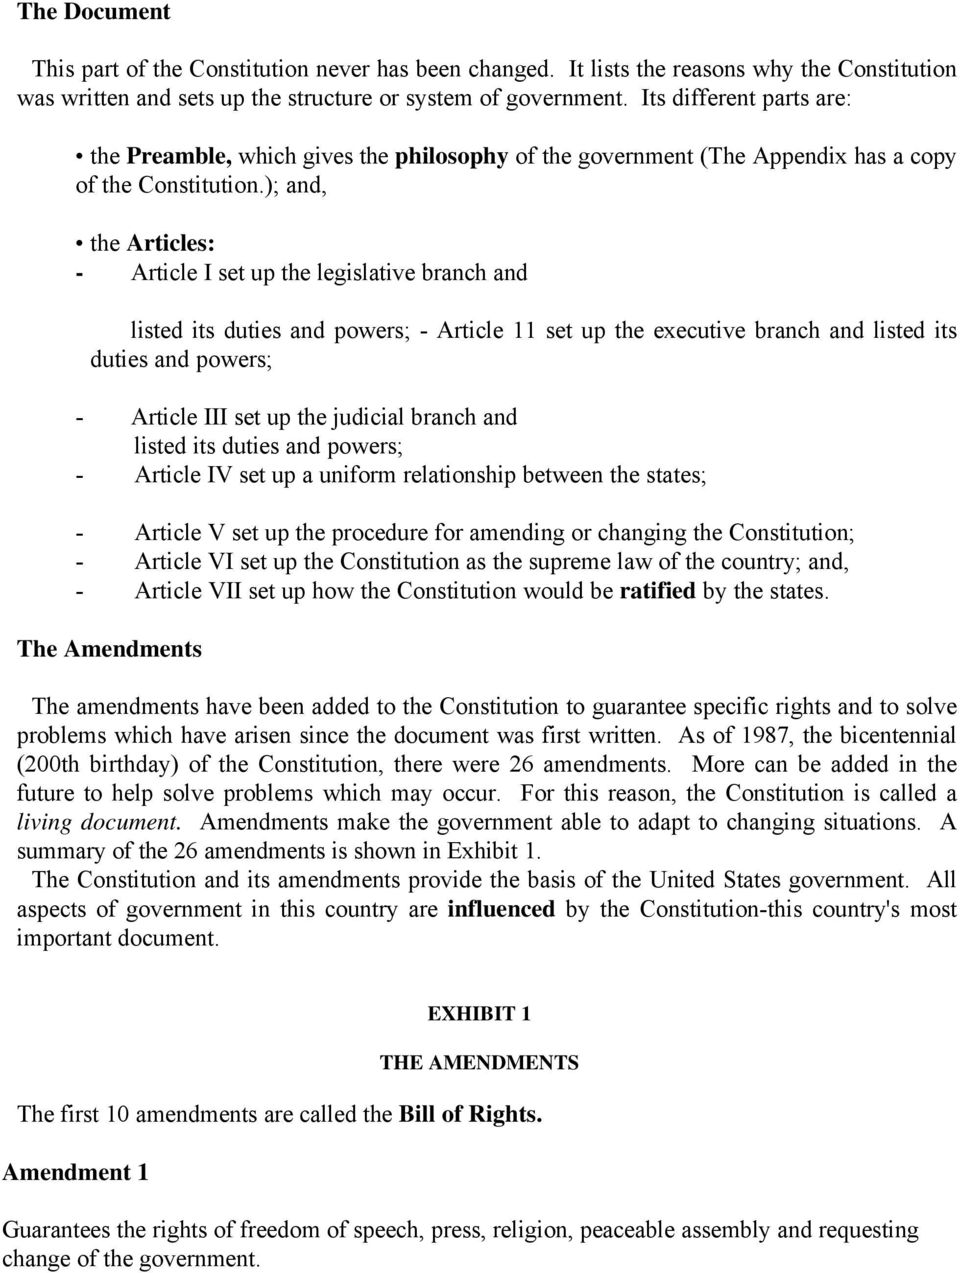 ); and, the Articles: - Article I set up the legislative branch and listed its duties and powers; - Article 11 set up the executive branch and listed its duties and powers; - Article III set up the